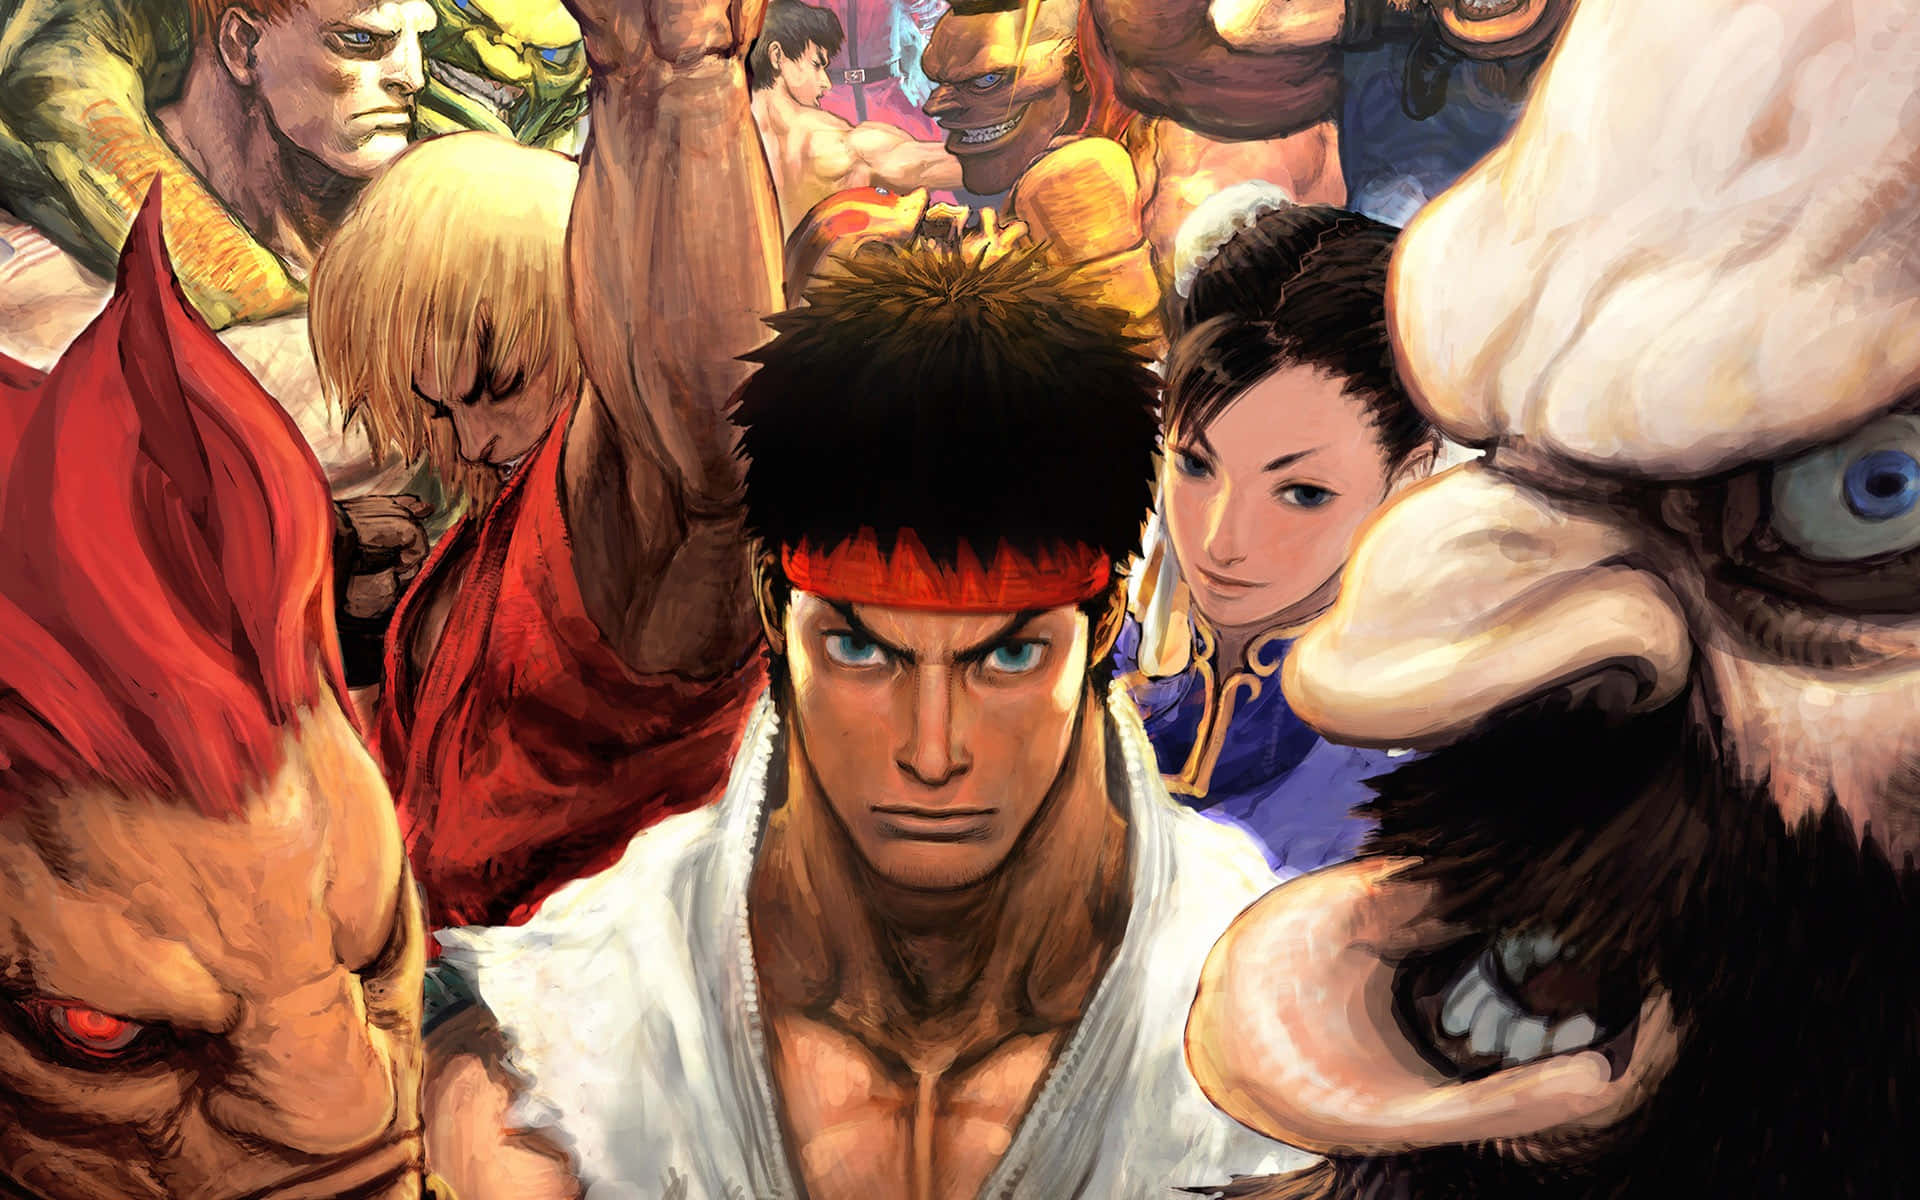 Iconic Street Fighter Characters in Action Wallpaper